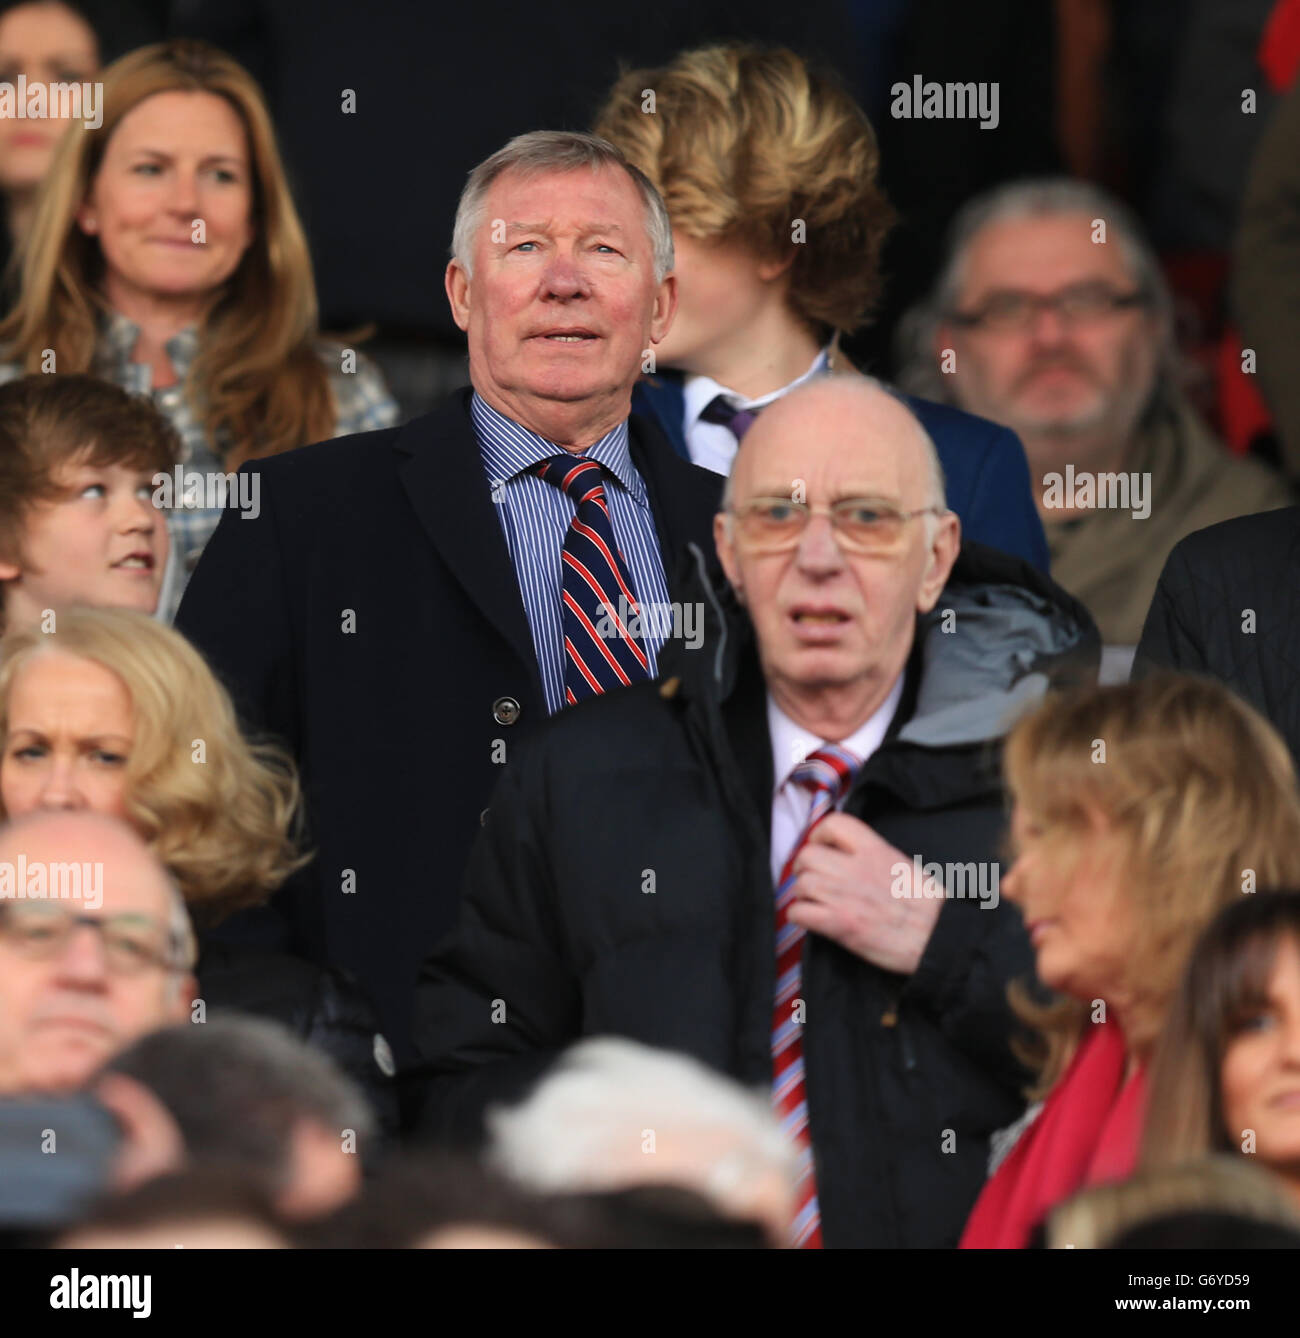 Former Manchester United manager Sir Alex Ferguson takes his seat in the  stands behind David Moyes' father David Moyes Snr Stock Photo - Alamy